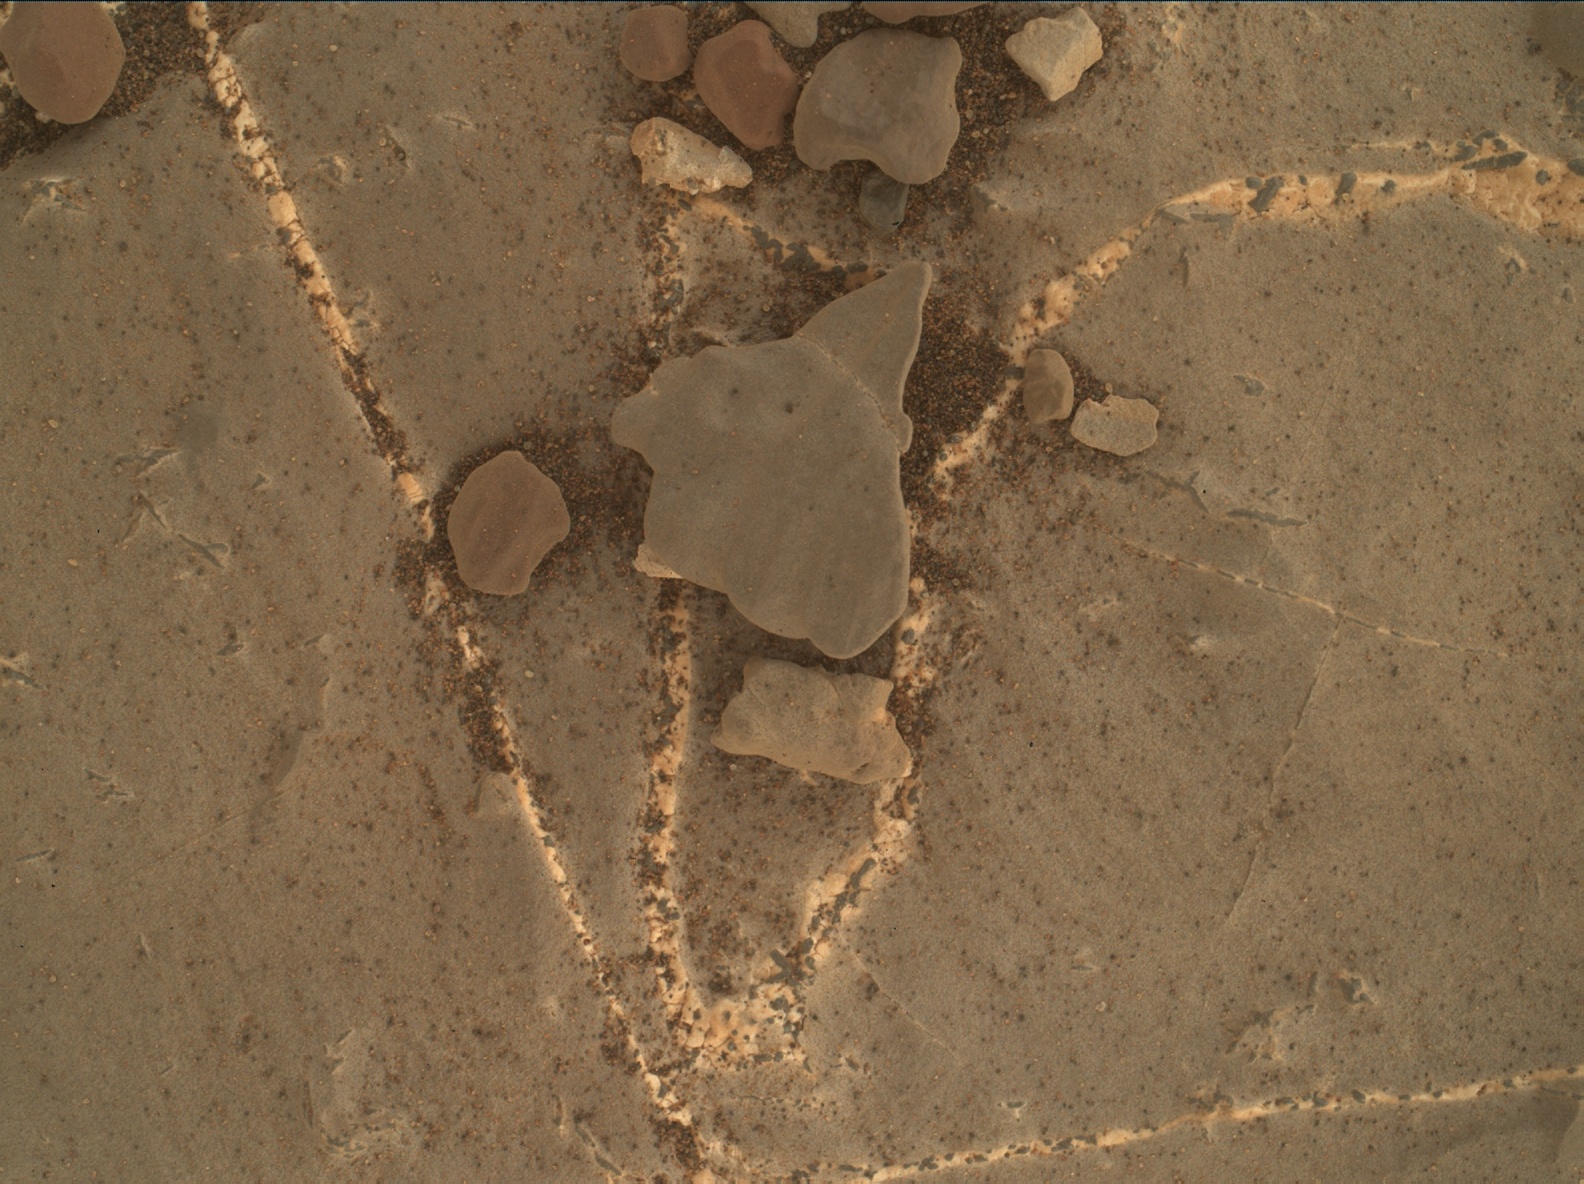 Nasa's Mars rover Curiosity acquired this image using its Mars Hand Lens Imager (MAHLI) on Sol 2218